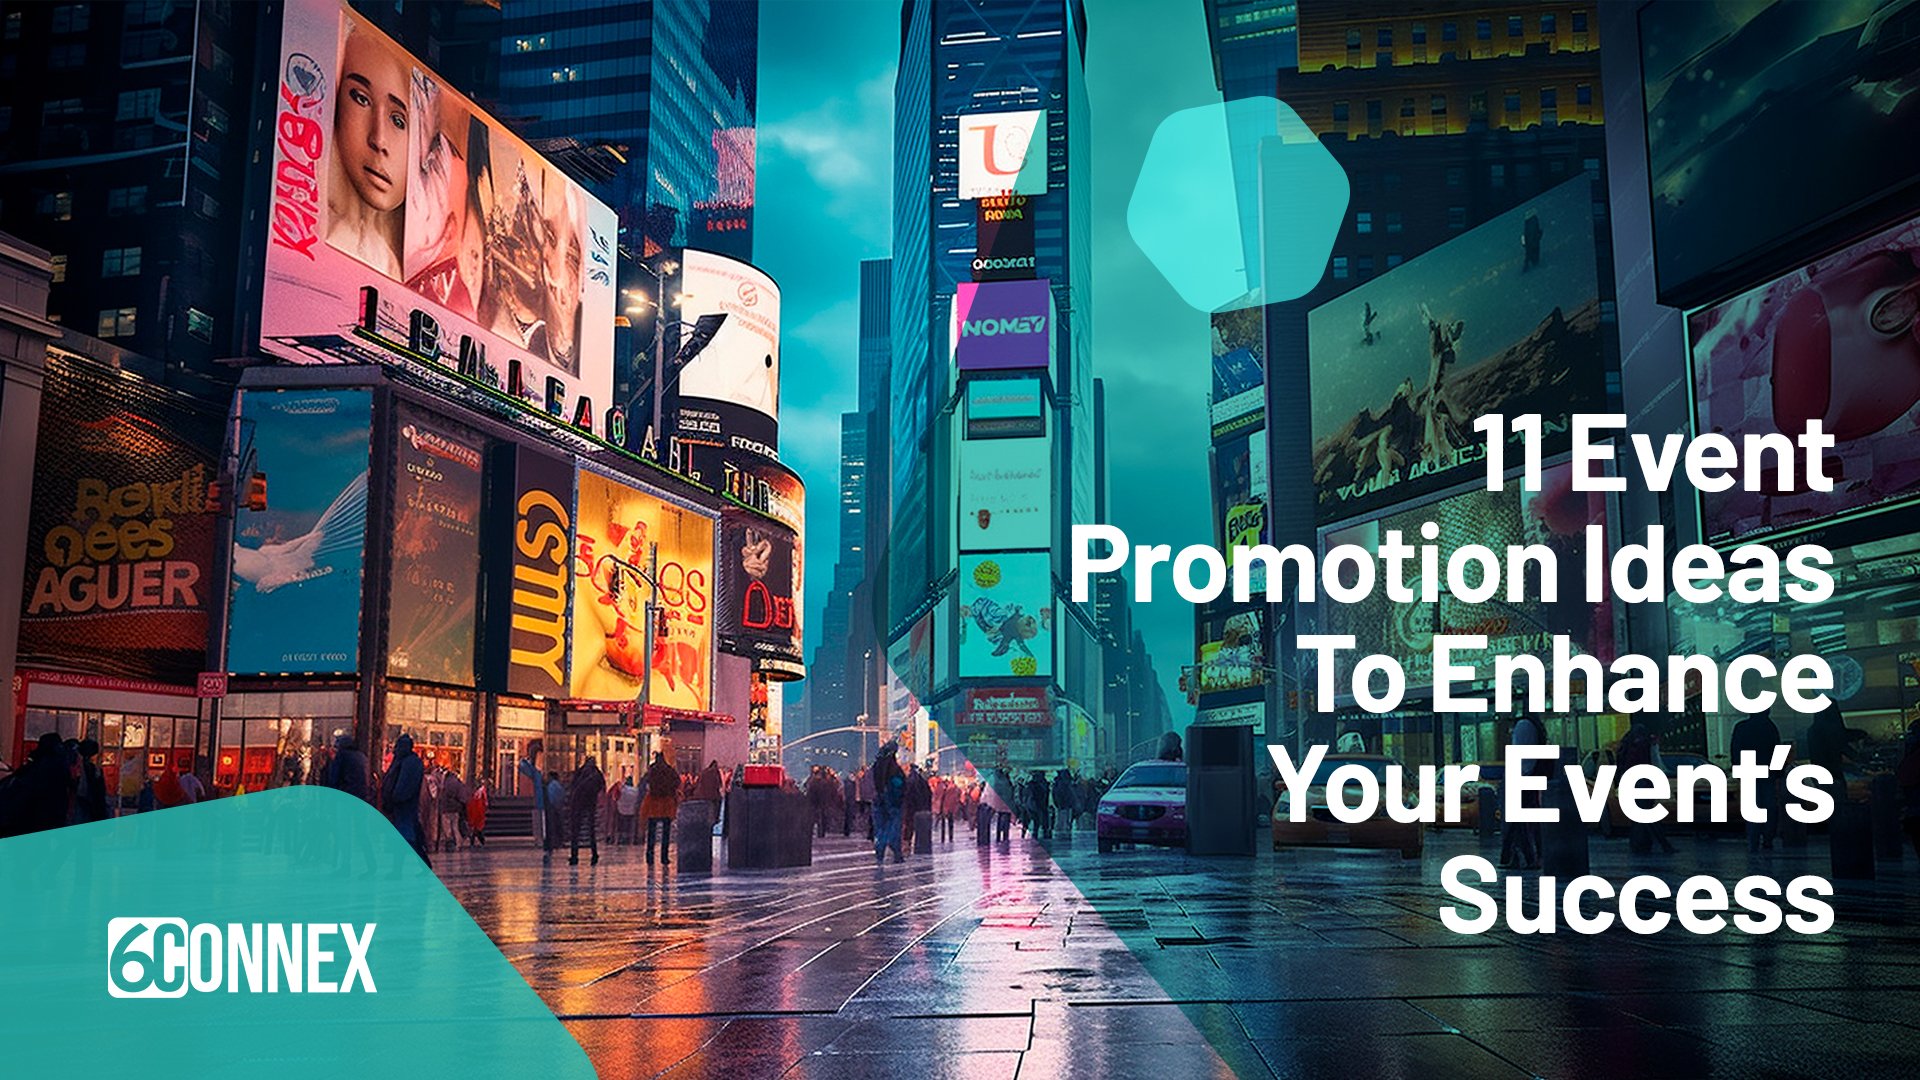 11 Event Promotion Ideas To Enhance Your Event’s Success